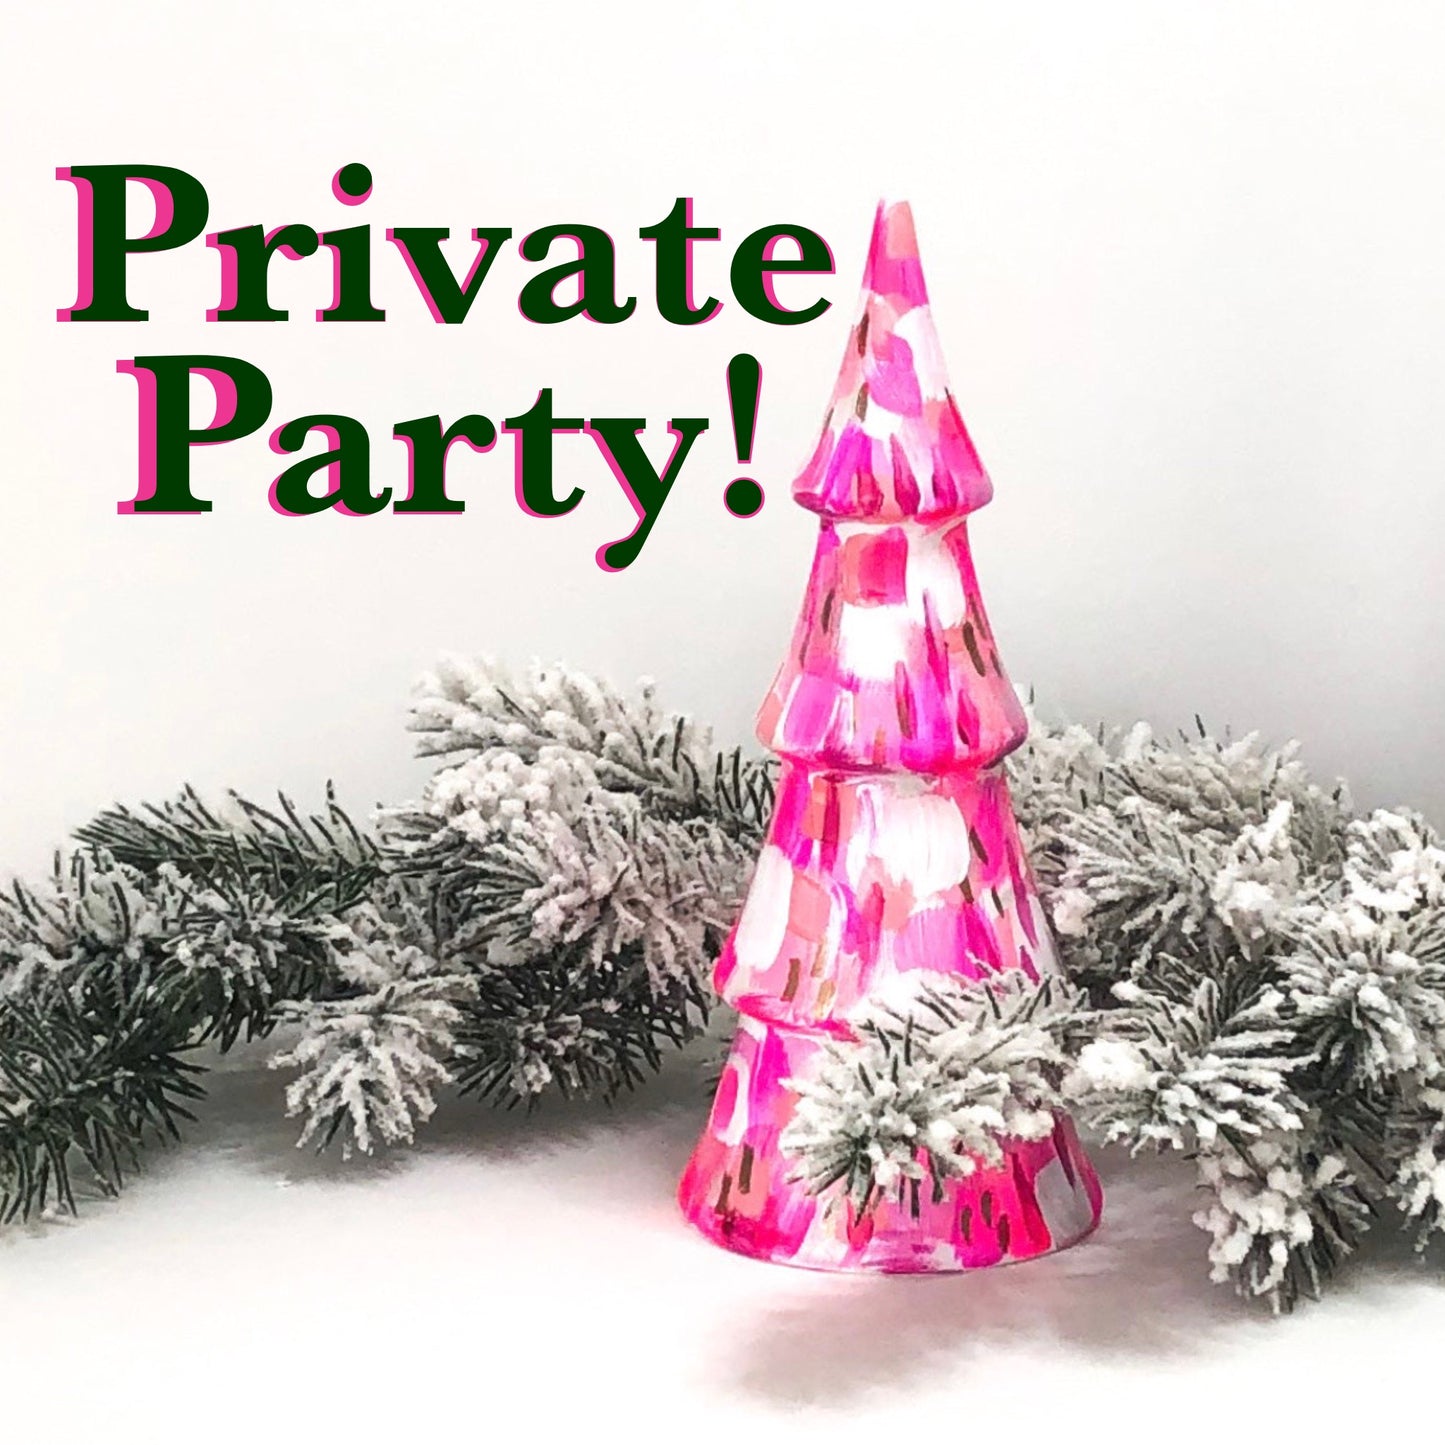 Private Party! -  Christmas Trees Sip & Ceramics paint night